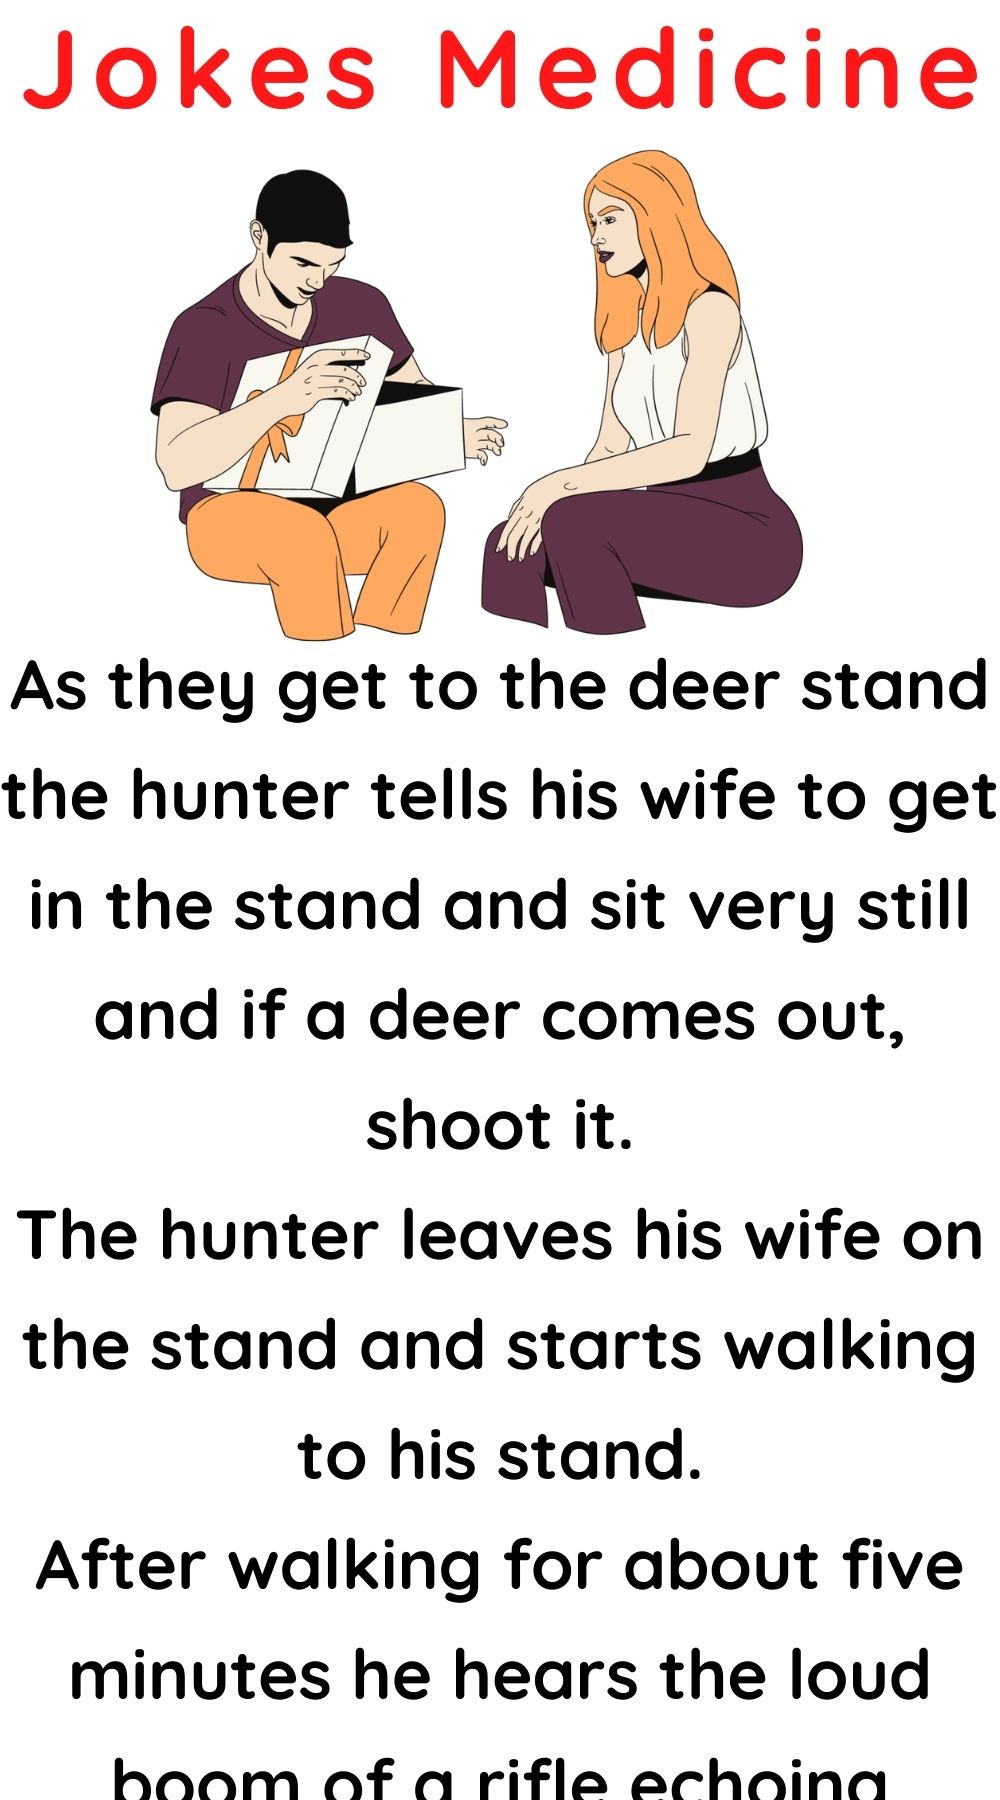 The Hunter Tells His Wife To Get In The Stand